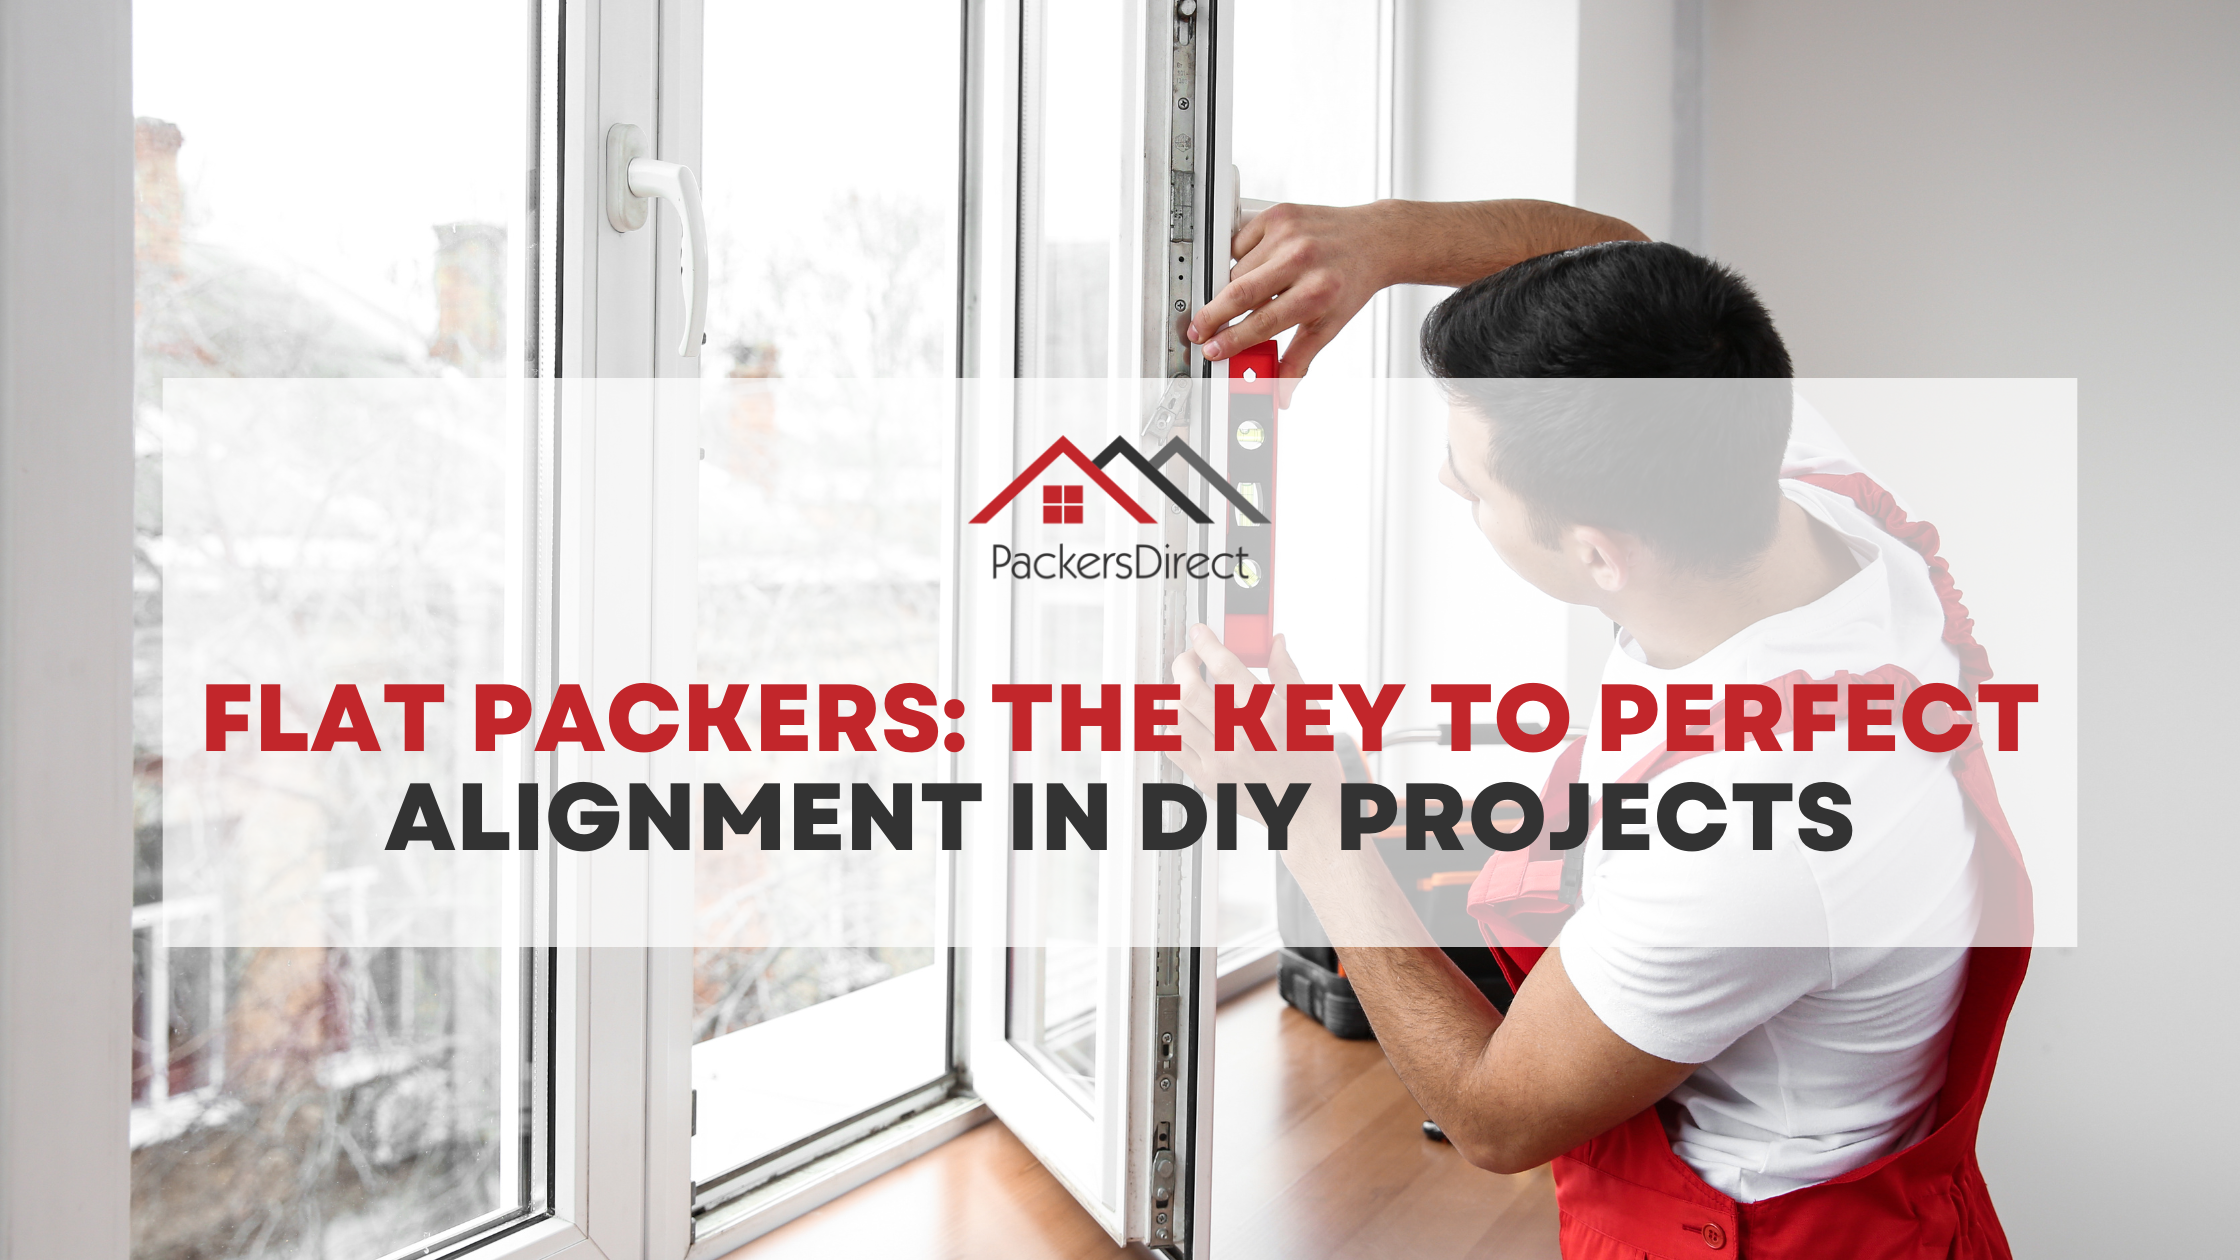 Flat Packers: The Key to Perfect Alignment in DIY Projects